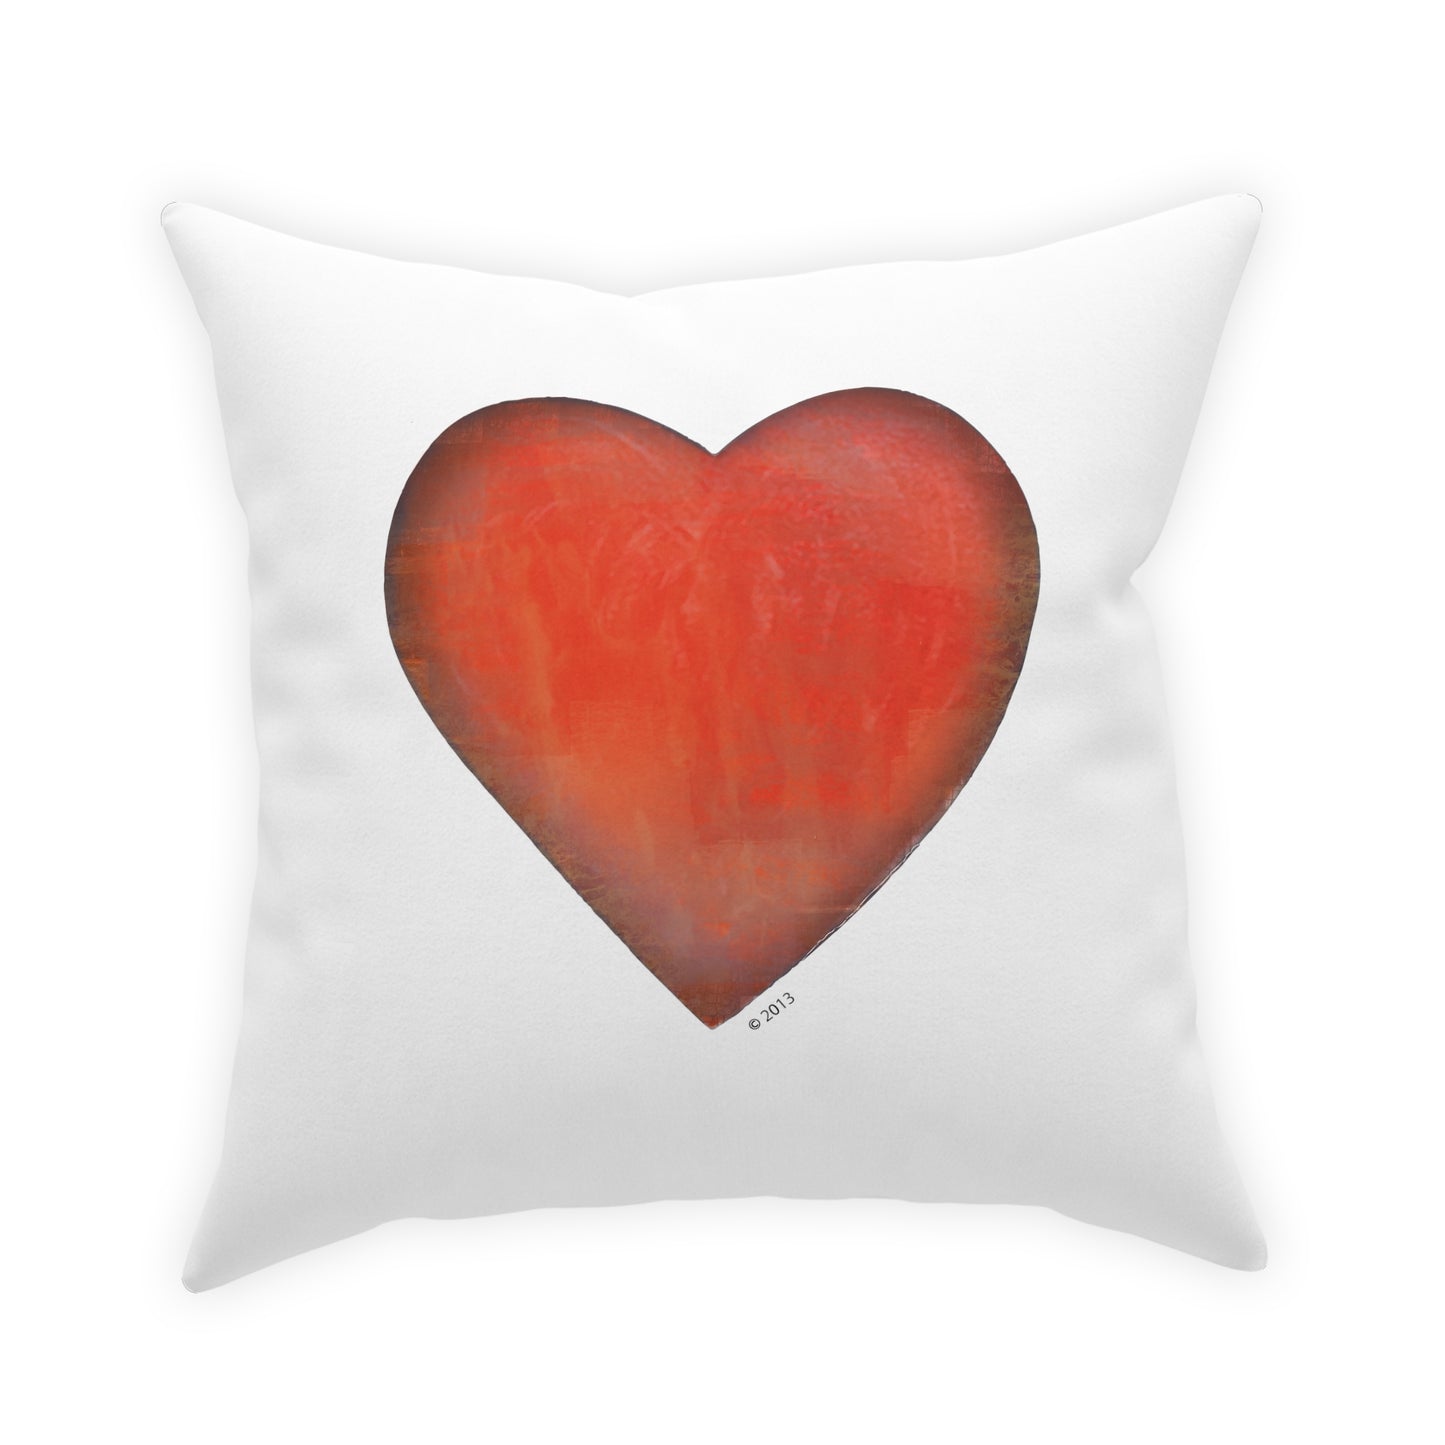 Red Throw Pillow - Colorful Throw Pillow - Heart Throw Pillow for couch, sofa or bed